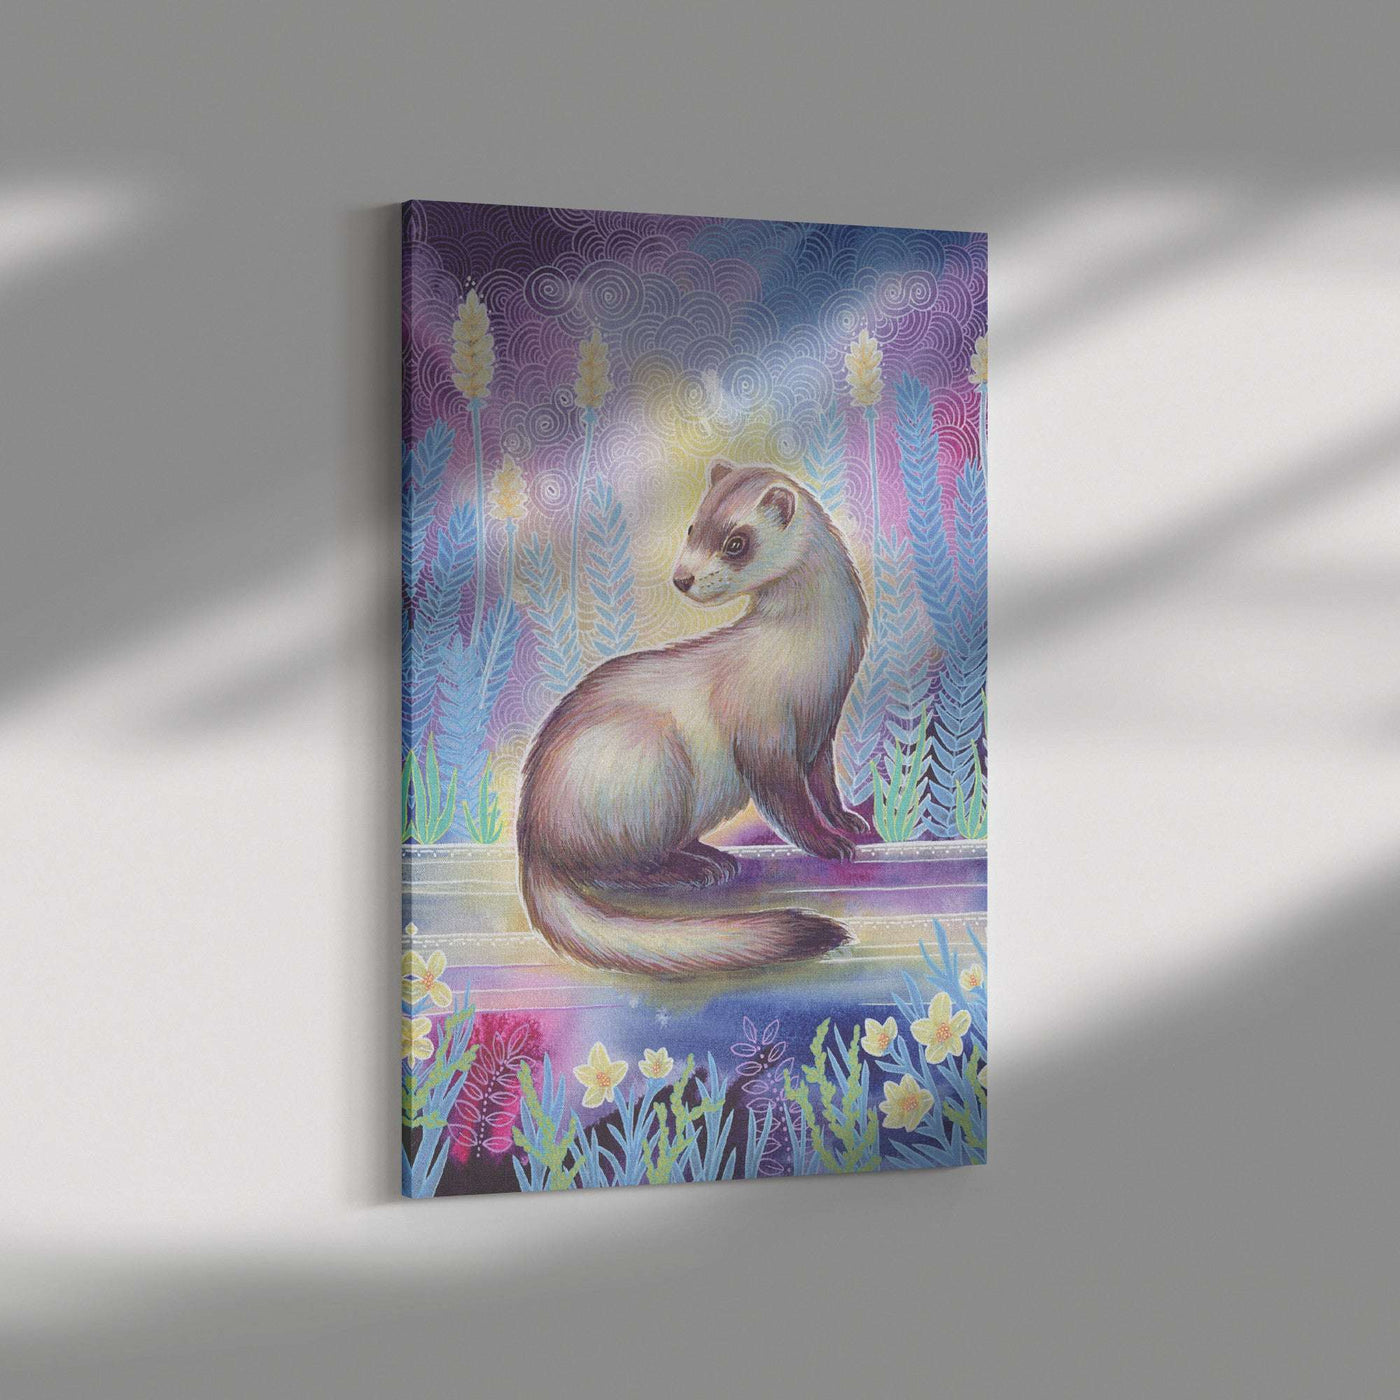 Canvas Art Print depicting a whimsical painting of a ferret amidst flowers with a colorful, patterned background, hung on a light grey wall with soft lighting.